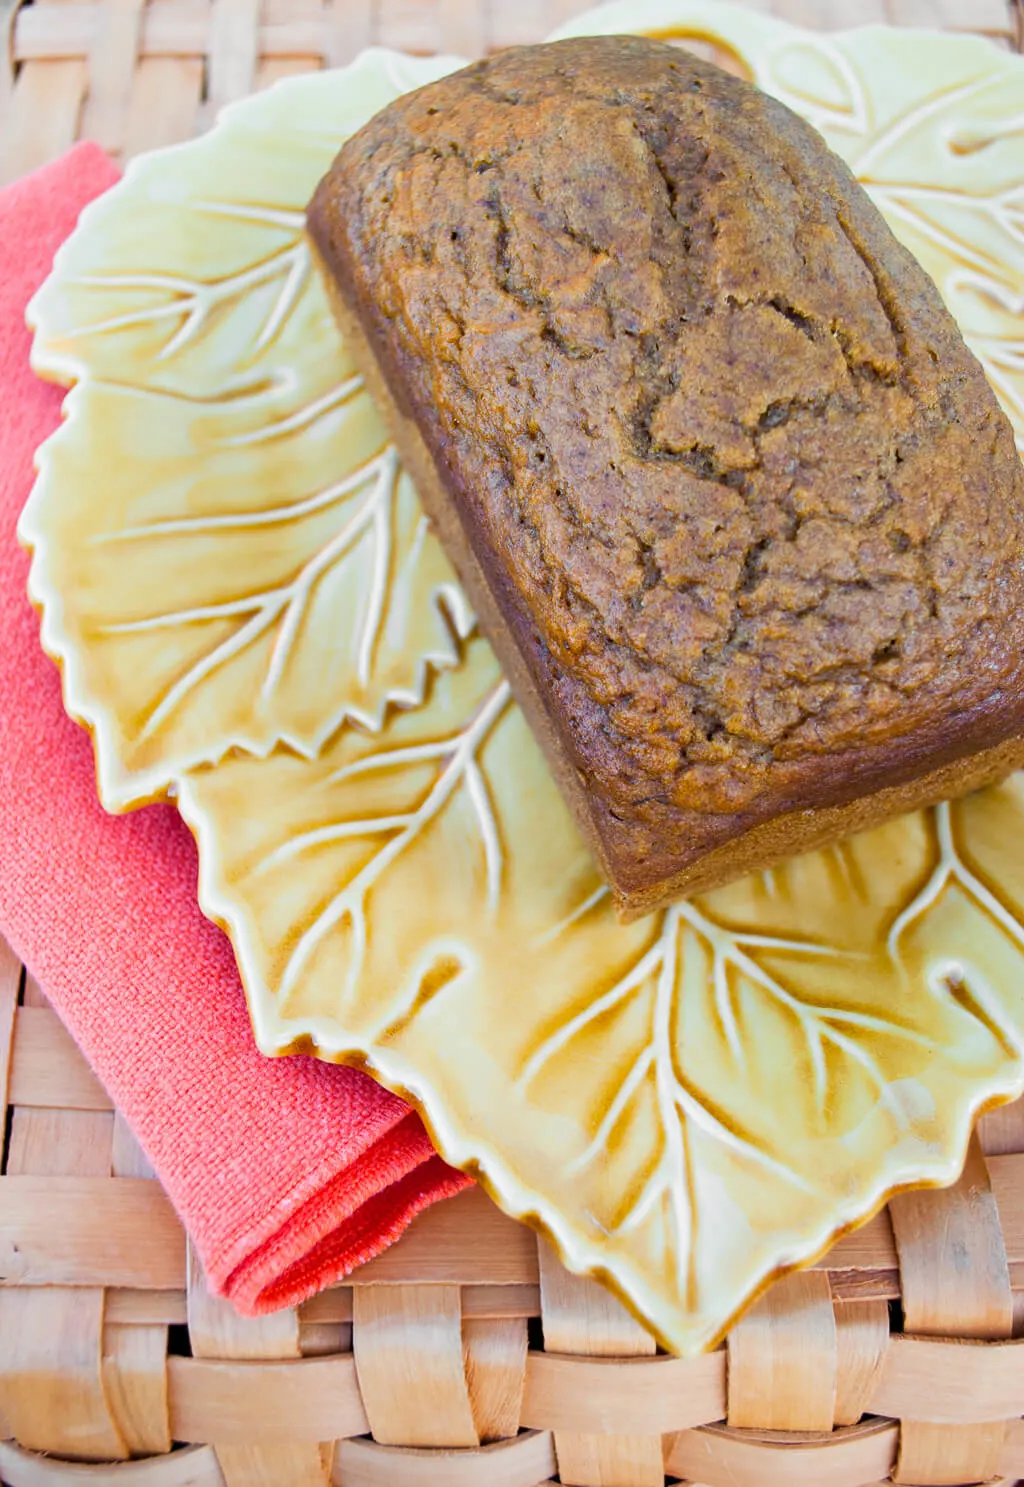 Pumpkin banana bread recipe with less sugar, coconut oil, healthier flours and pumpkin pie spices. Make mini-loaves or full size (I like to make mini-loaves and freeze).